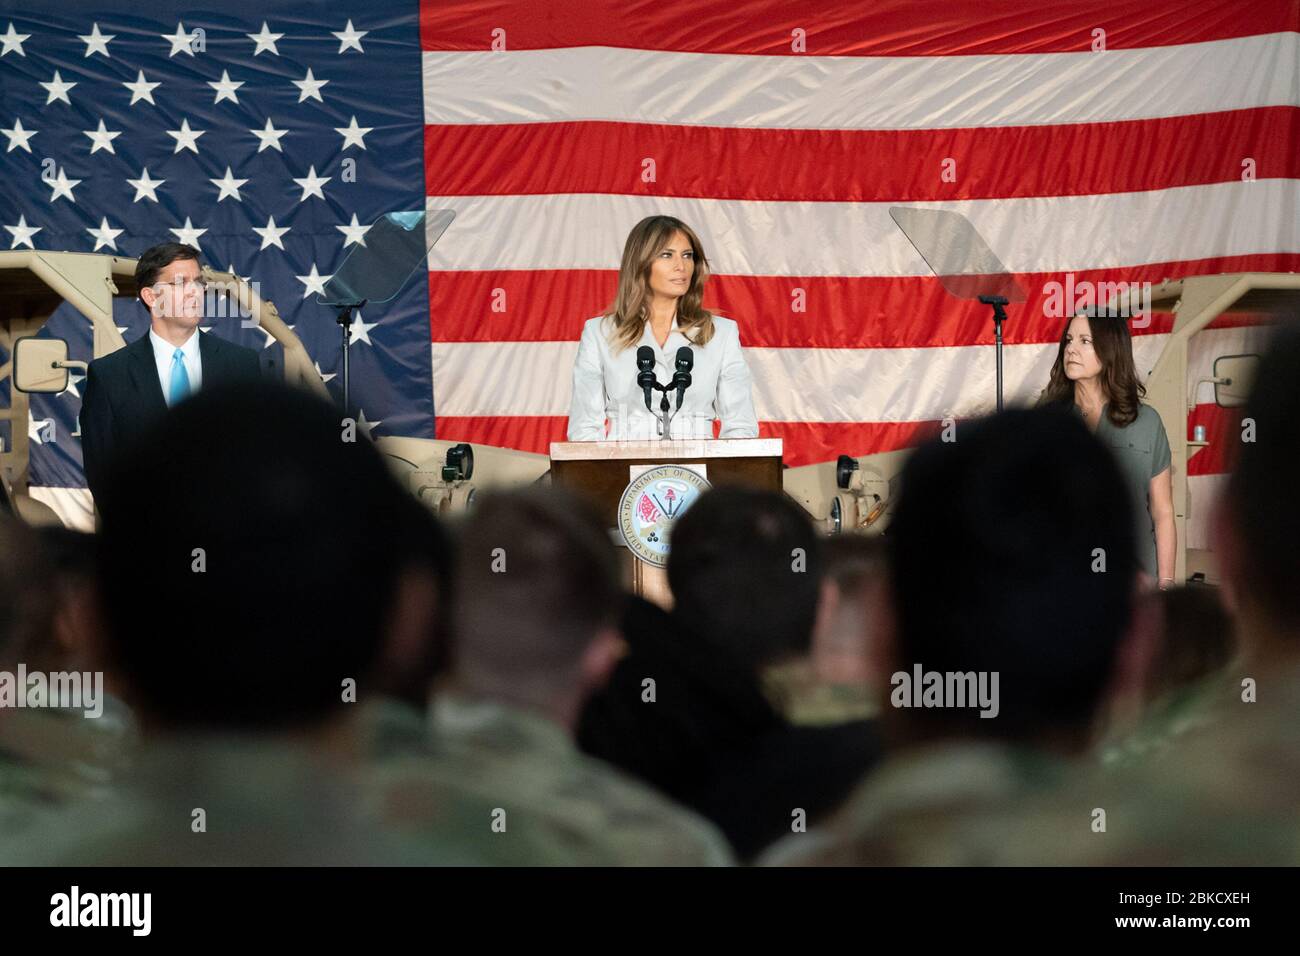 First Lady Melania Trump, joined onstage by Second Lady Karen Pence and Secretary of the Army Dr. Mark Esper, delivers remarks during a military appreciation event Monday, April 15, 2019, at Fort Bragg, N.C. First Lady Melania Trump and Second Lady Karen Pence Visit Fort Bragg Stock Photo